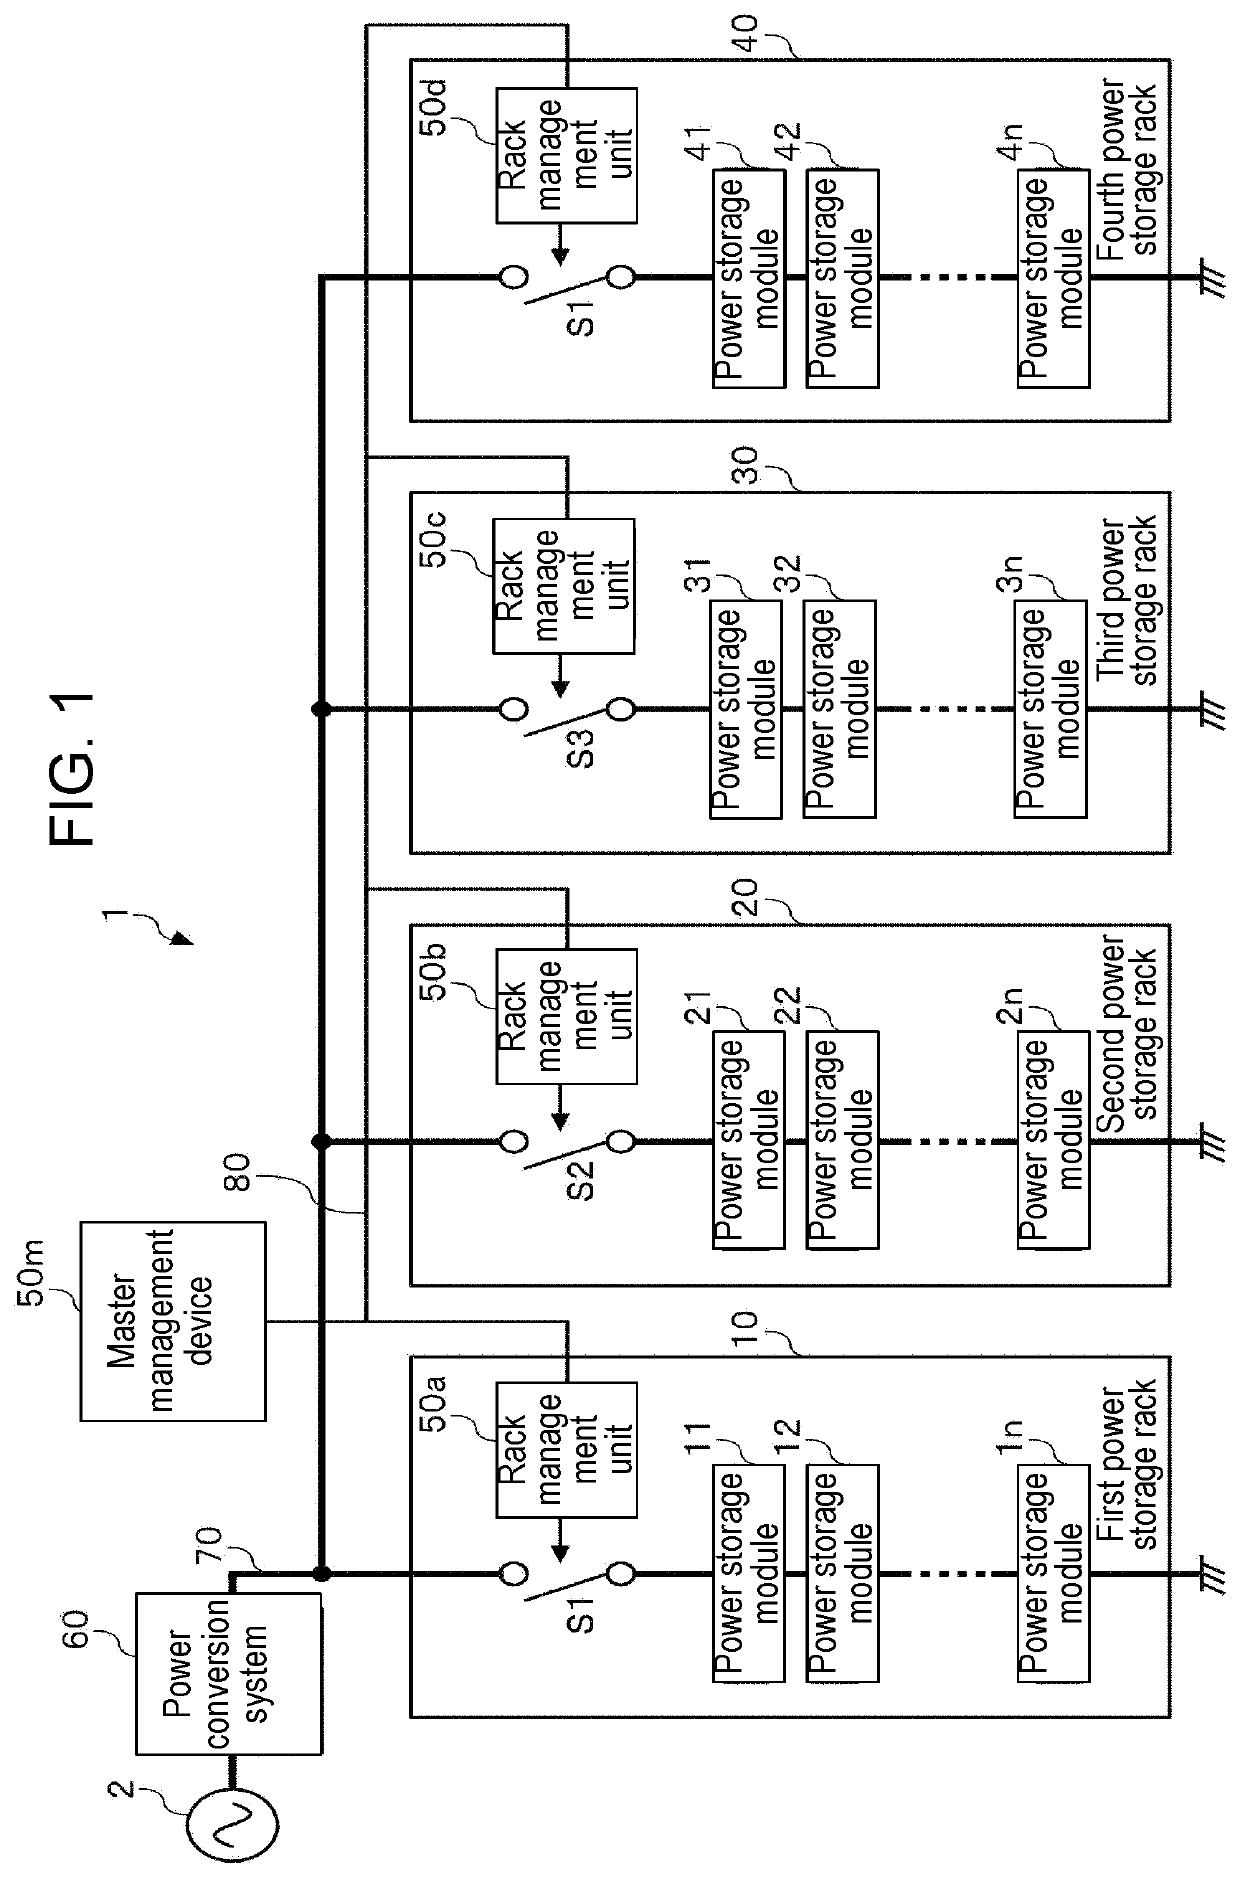 Management device and power storage system